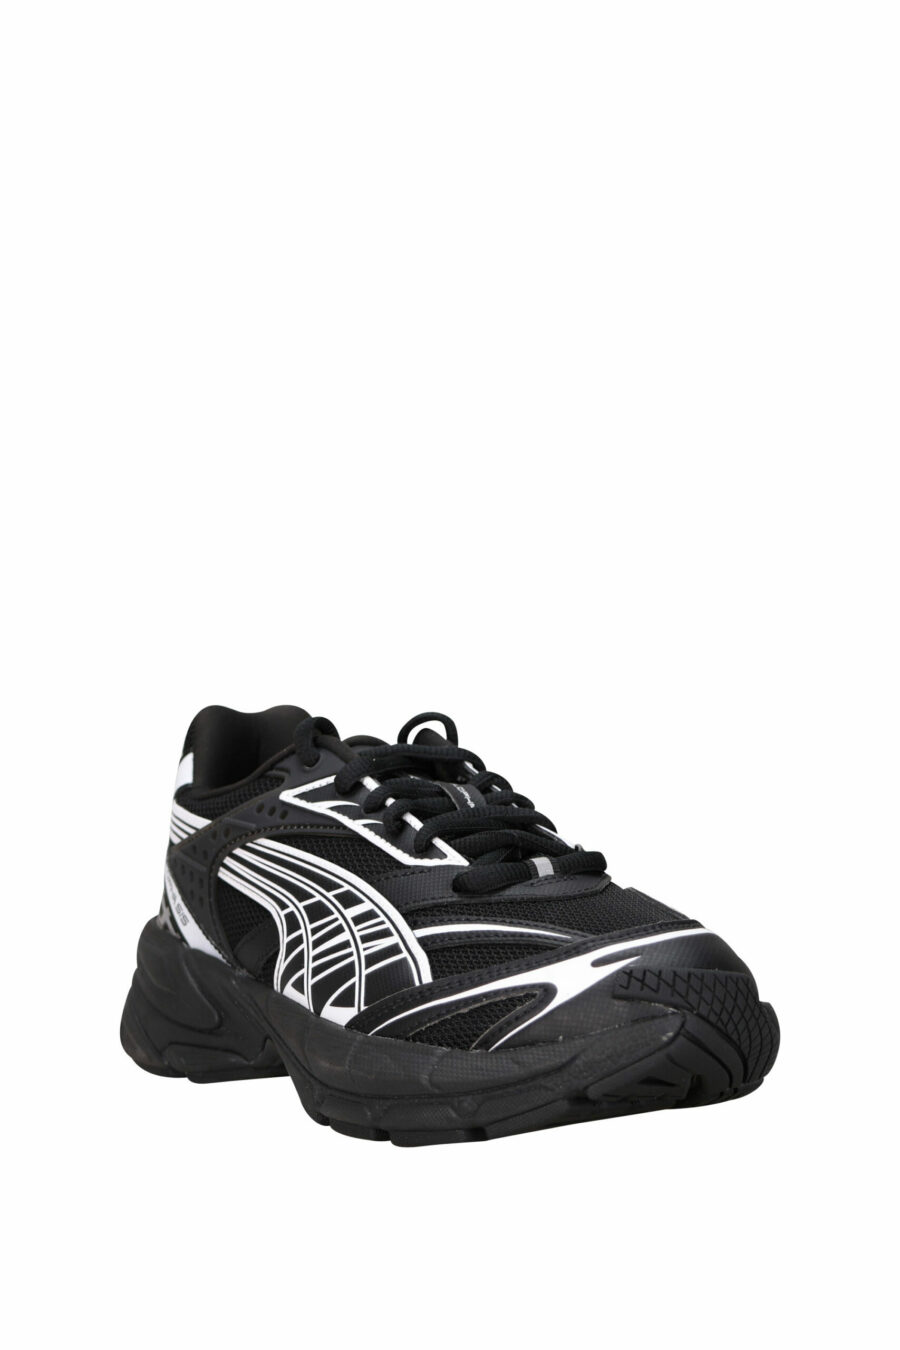 Black "velophasis" trainers with logo - 4099686403164 1 scaled